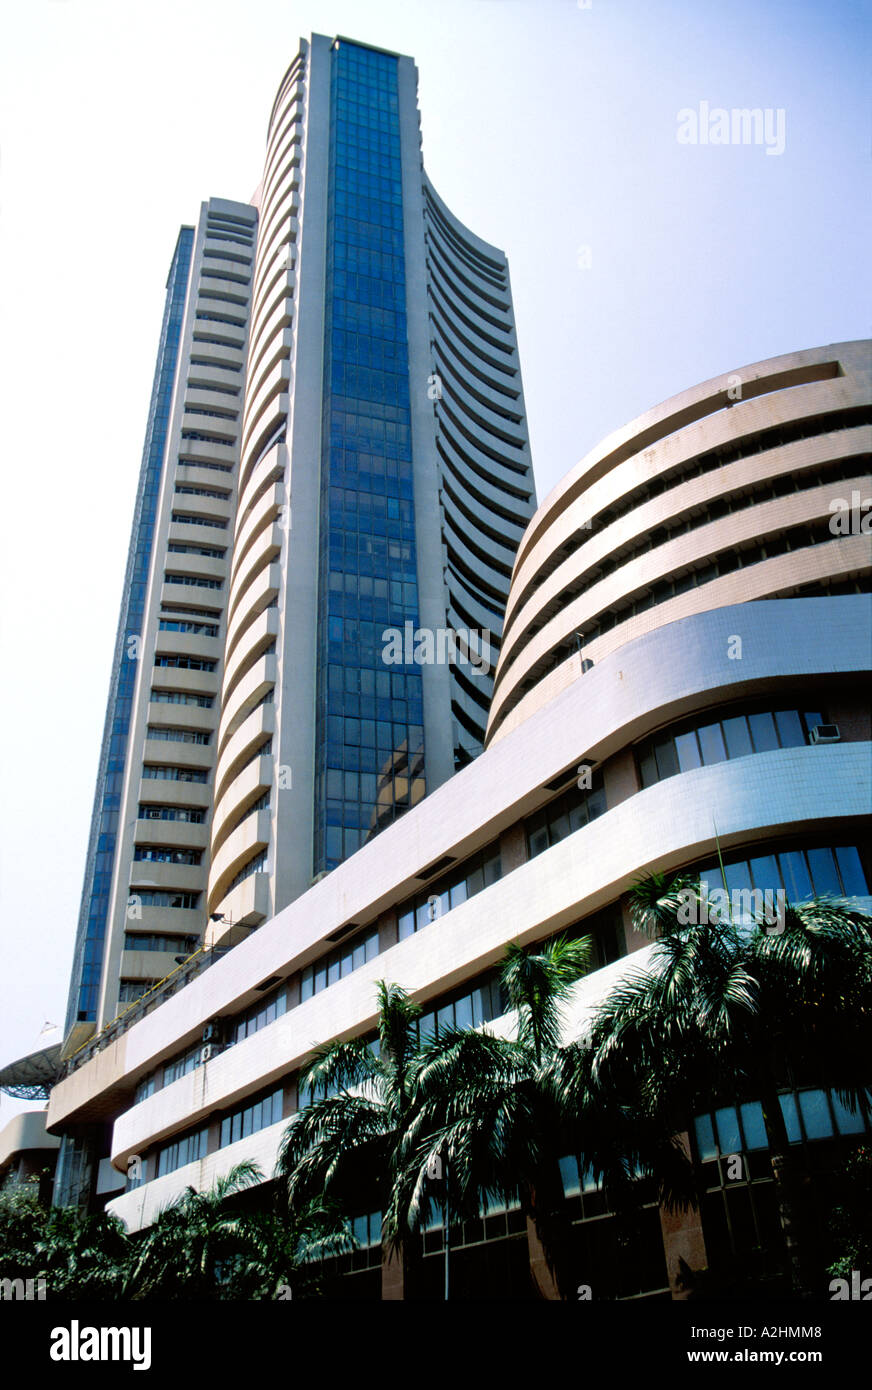 Bombay Stock Exchange housed in the 387ft high 28 storied building